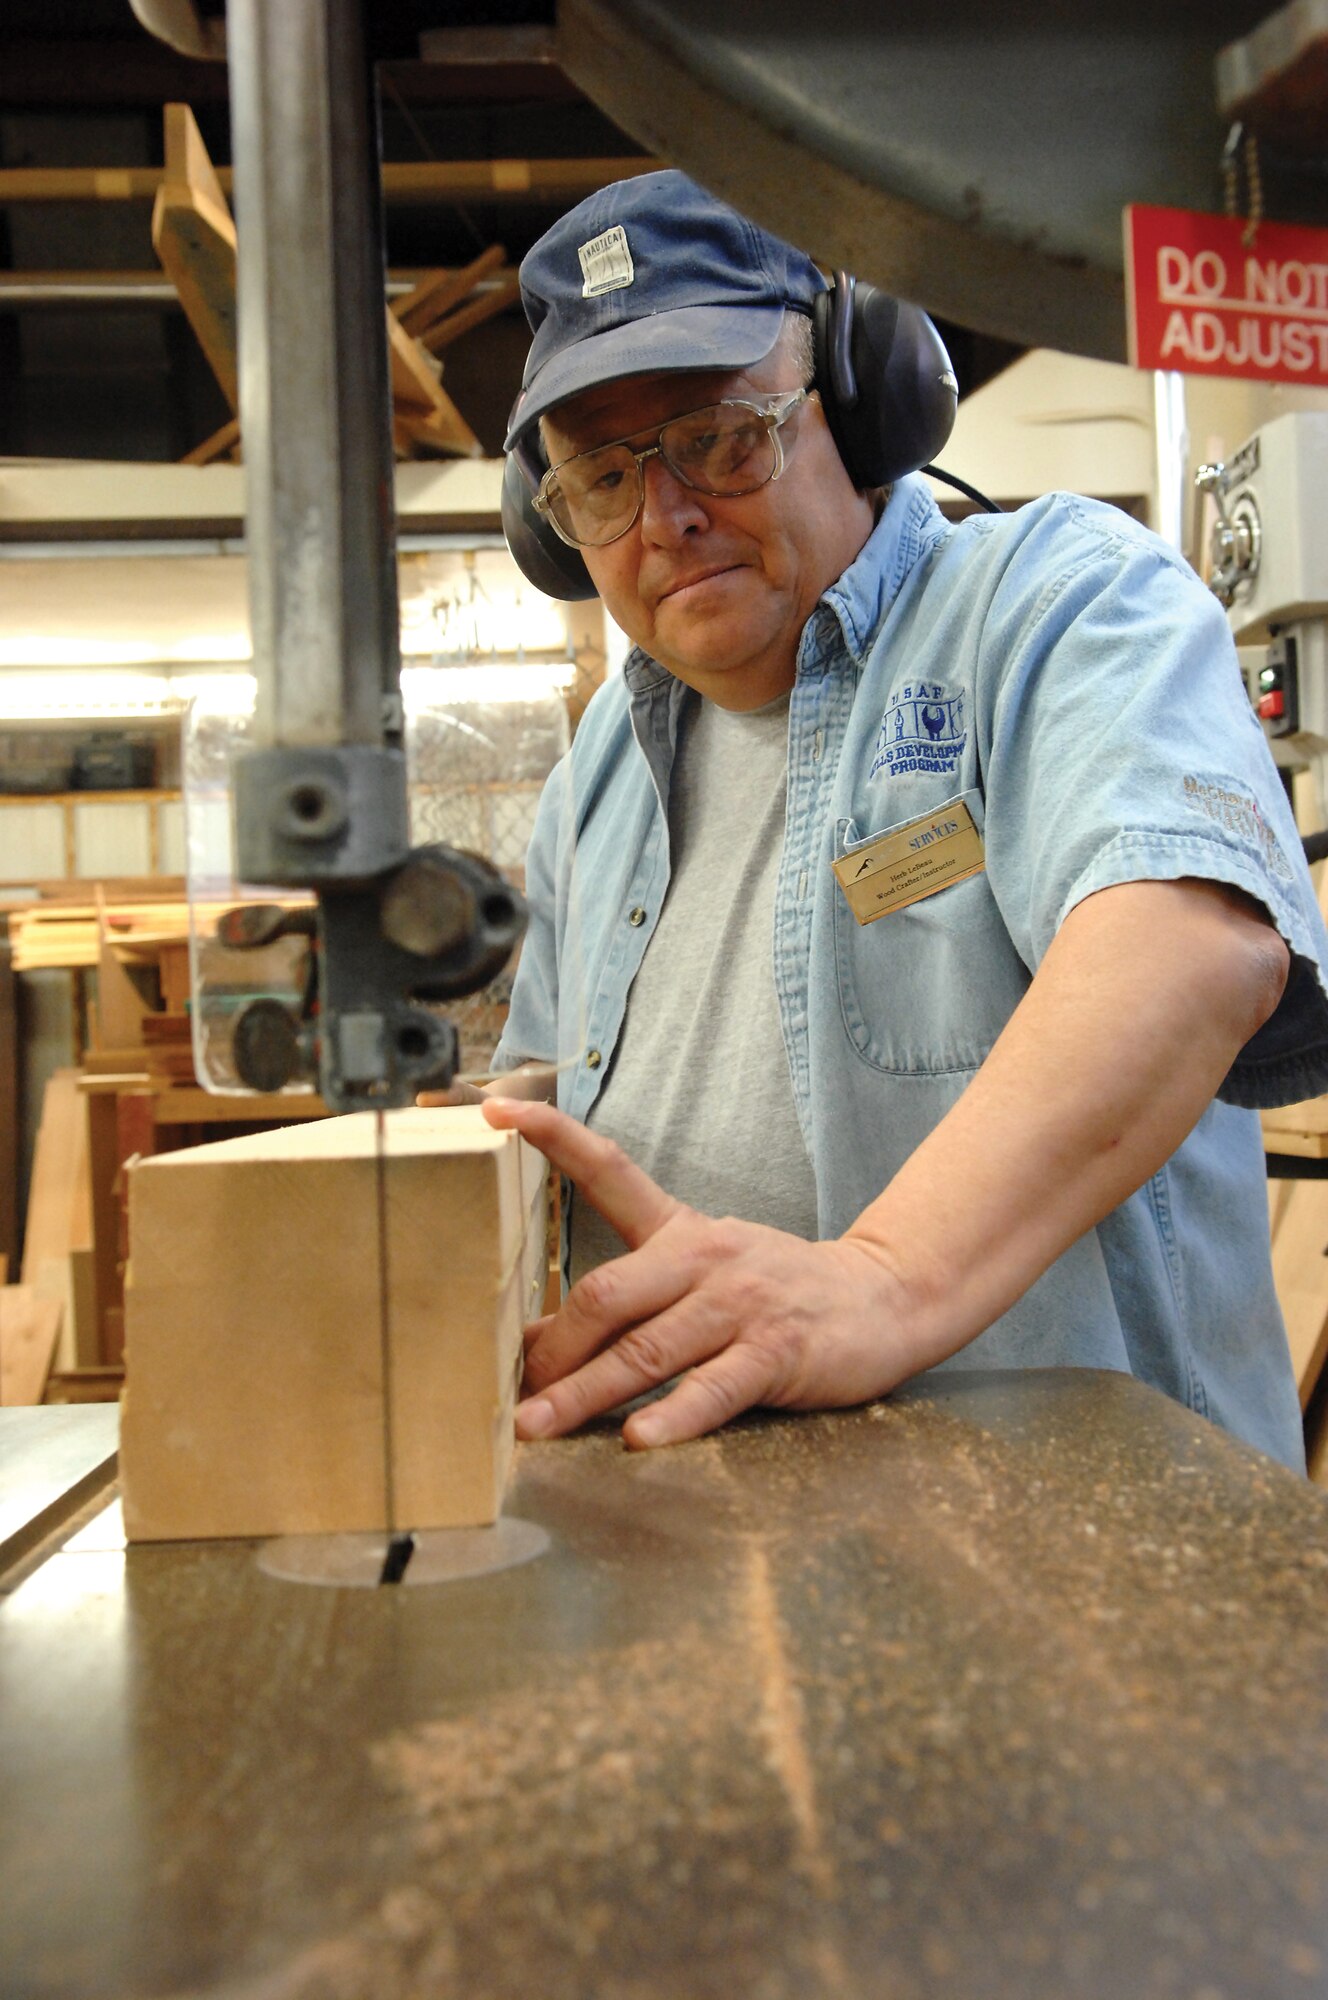 MCCHORD AIR FORCE BASE, Wash.-- Herb LeBeau,, 62nd Services Squadron woodworking instructor, prepares to slide a block of wood through a band saw in the arts and crafts woodworking area Jan. 18. (U.S. Air Force Photo/Abner Guzman)
